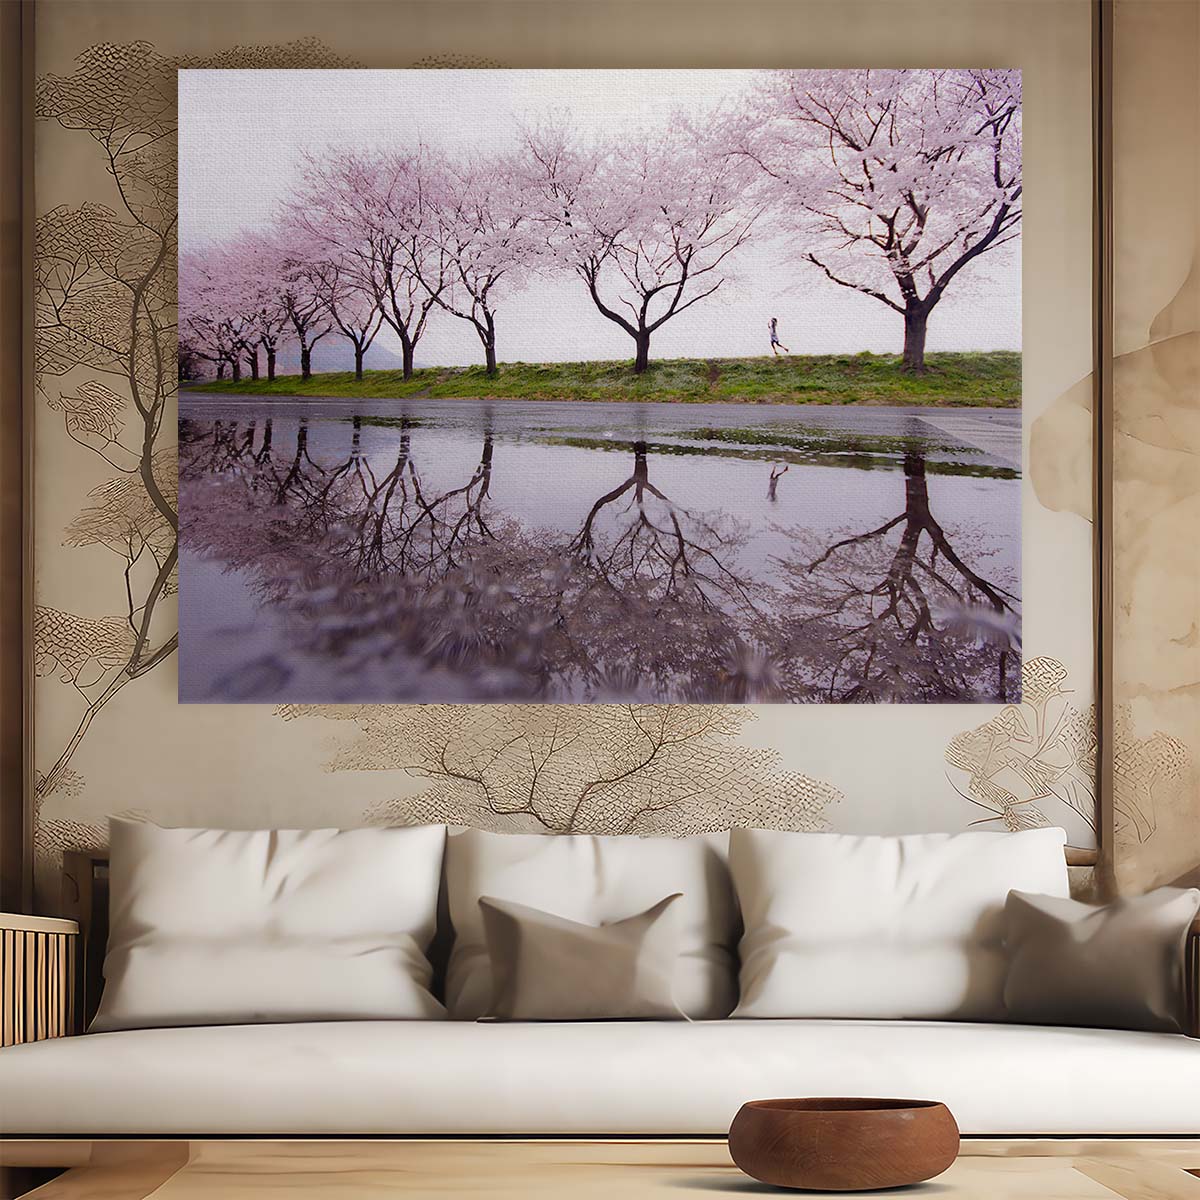 Sakura Blossom Reflections Japan Spring Park Wall Art by Luxuriance Designs. Made in USA.